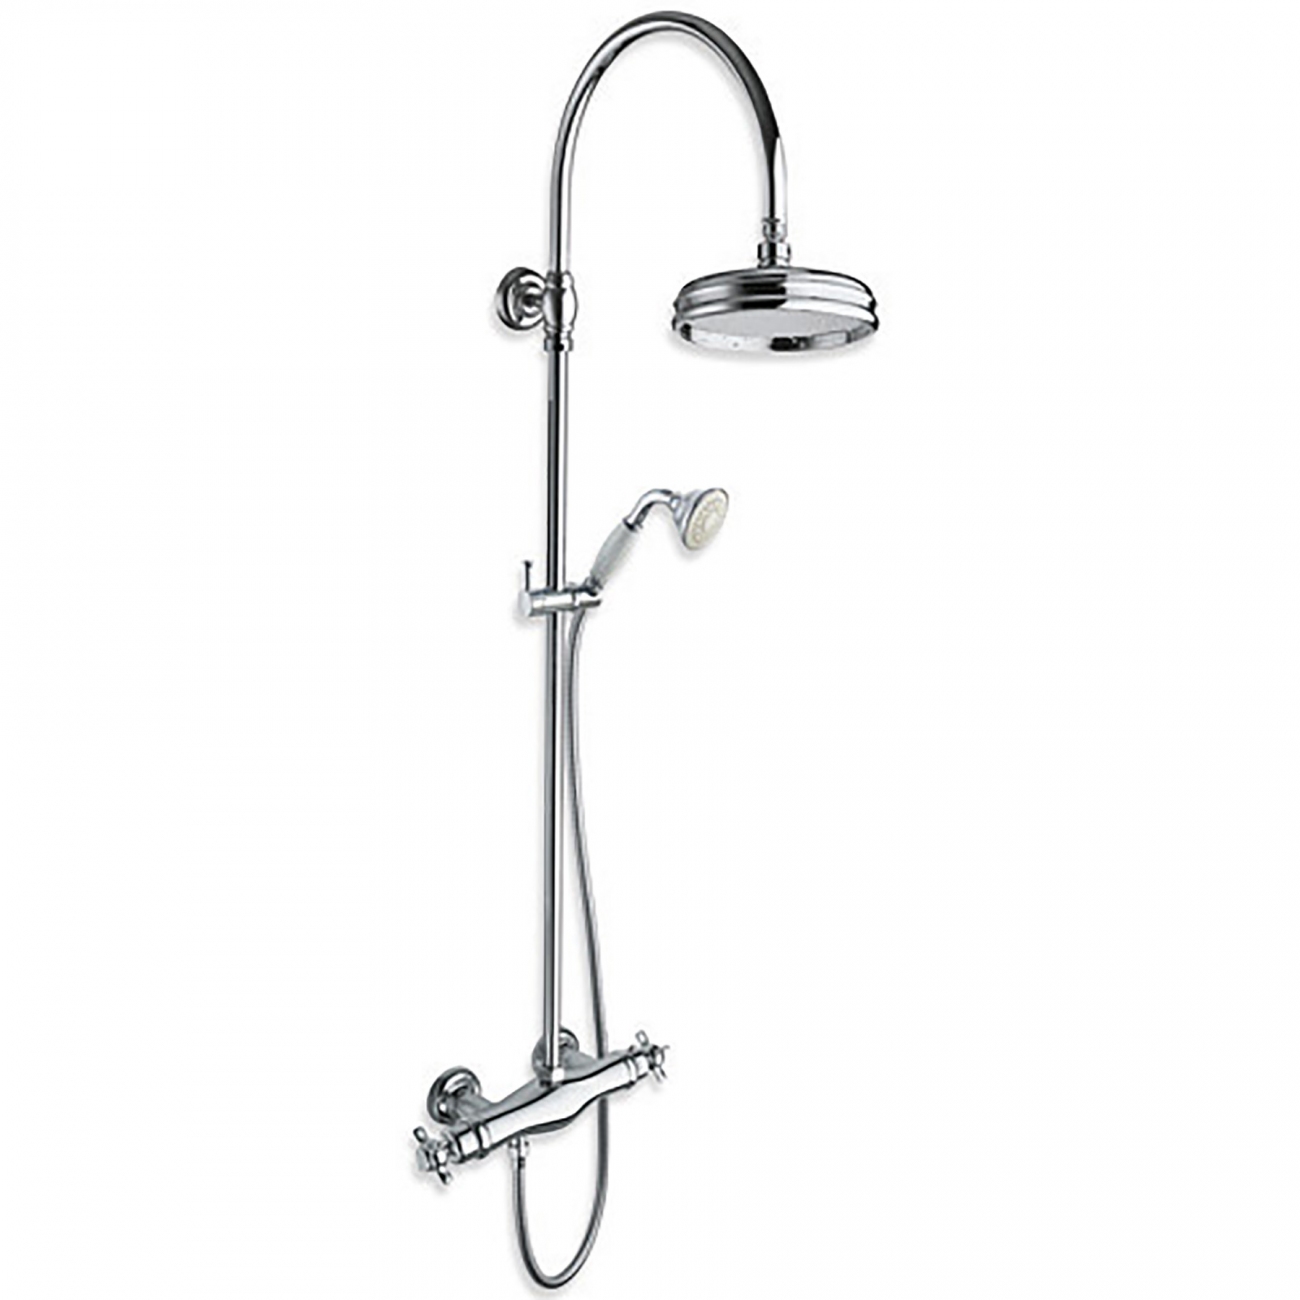 Cristina Classic Lines Londra Wall Mounted Shower Thermostatic Mixer